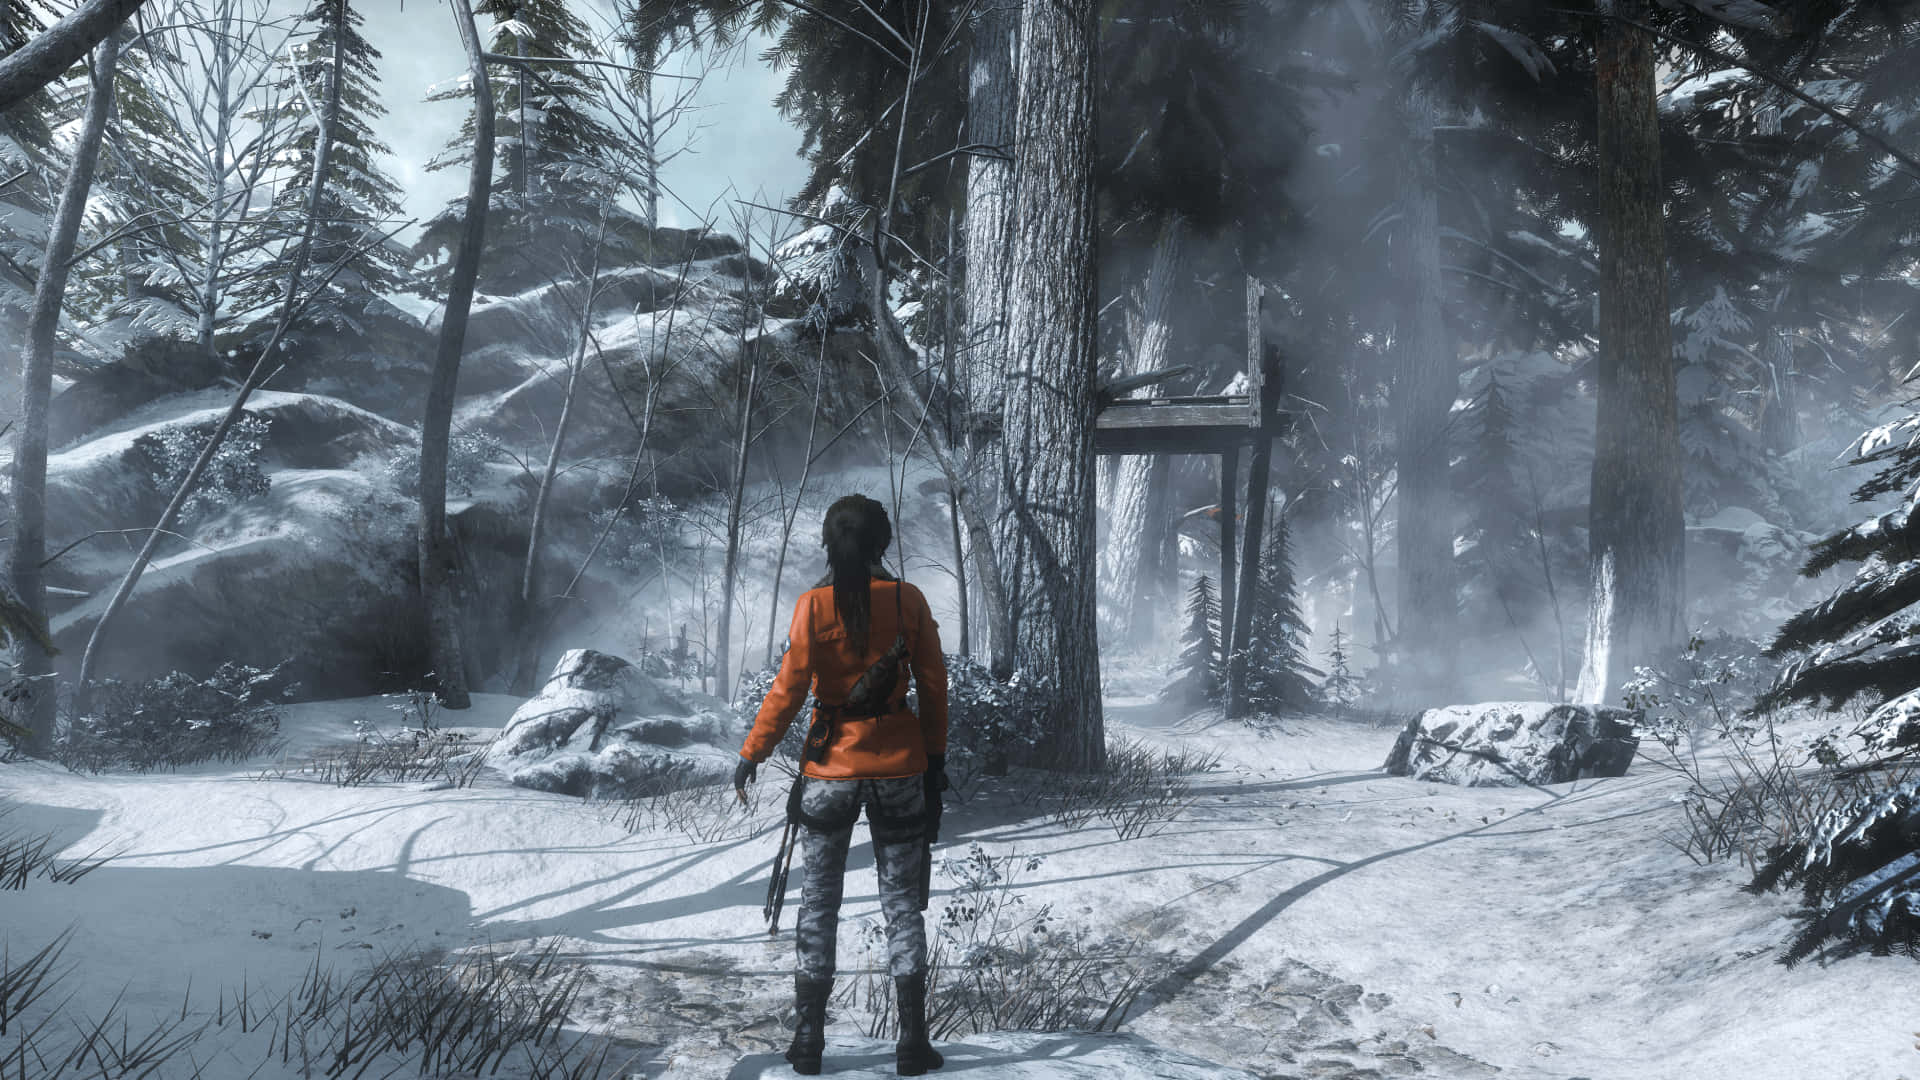 Lara Croft In The Middle Of Snow Forest 1920x1080 Rise Of The Tomb Raider Background